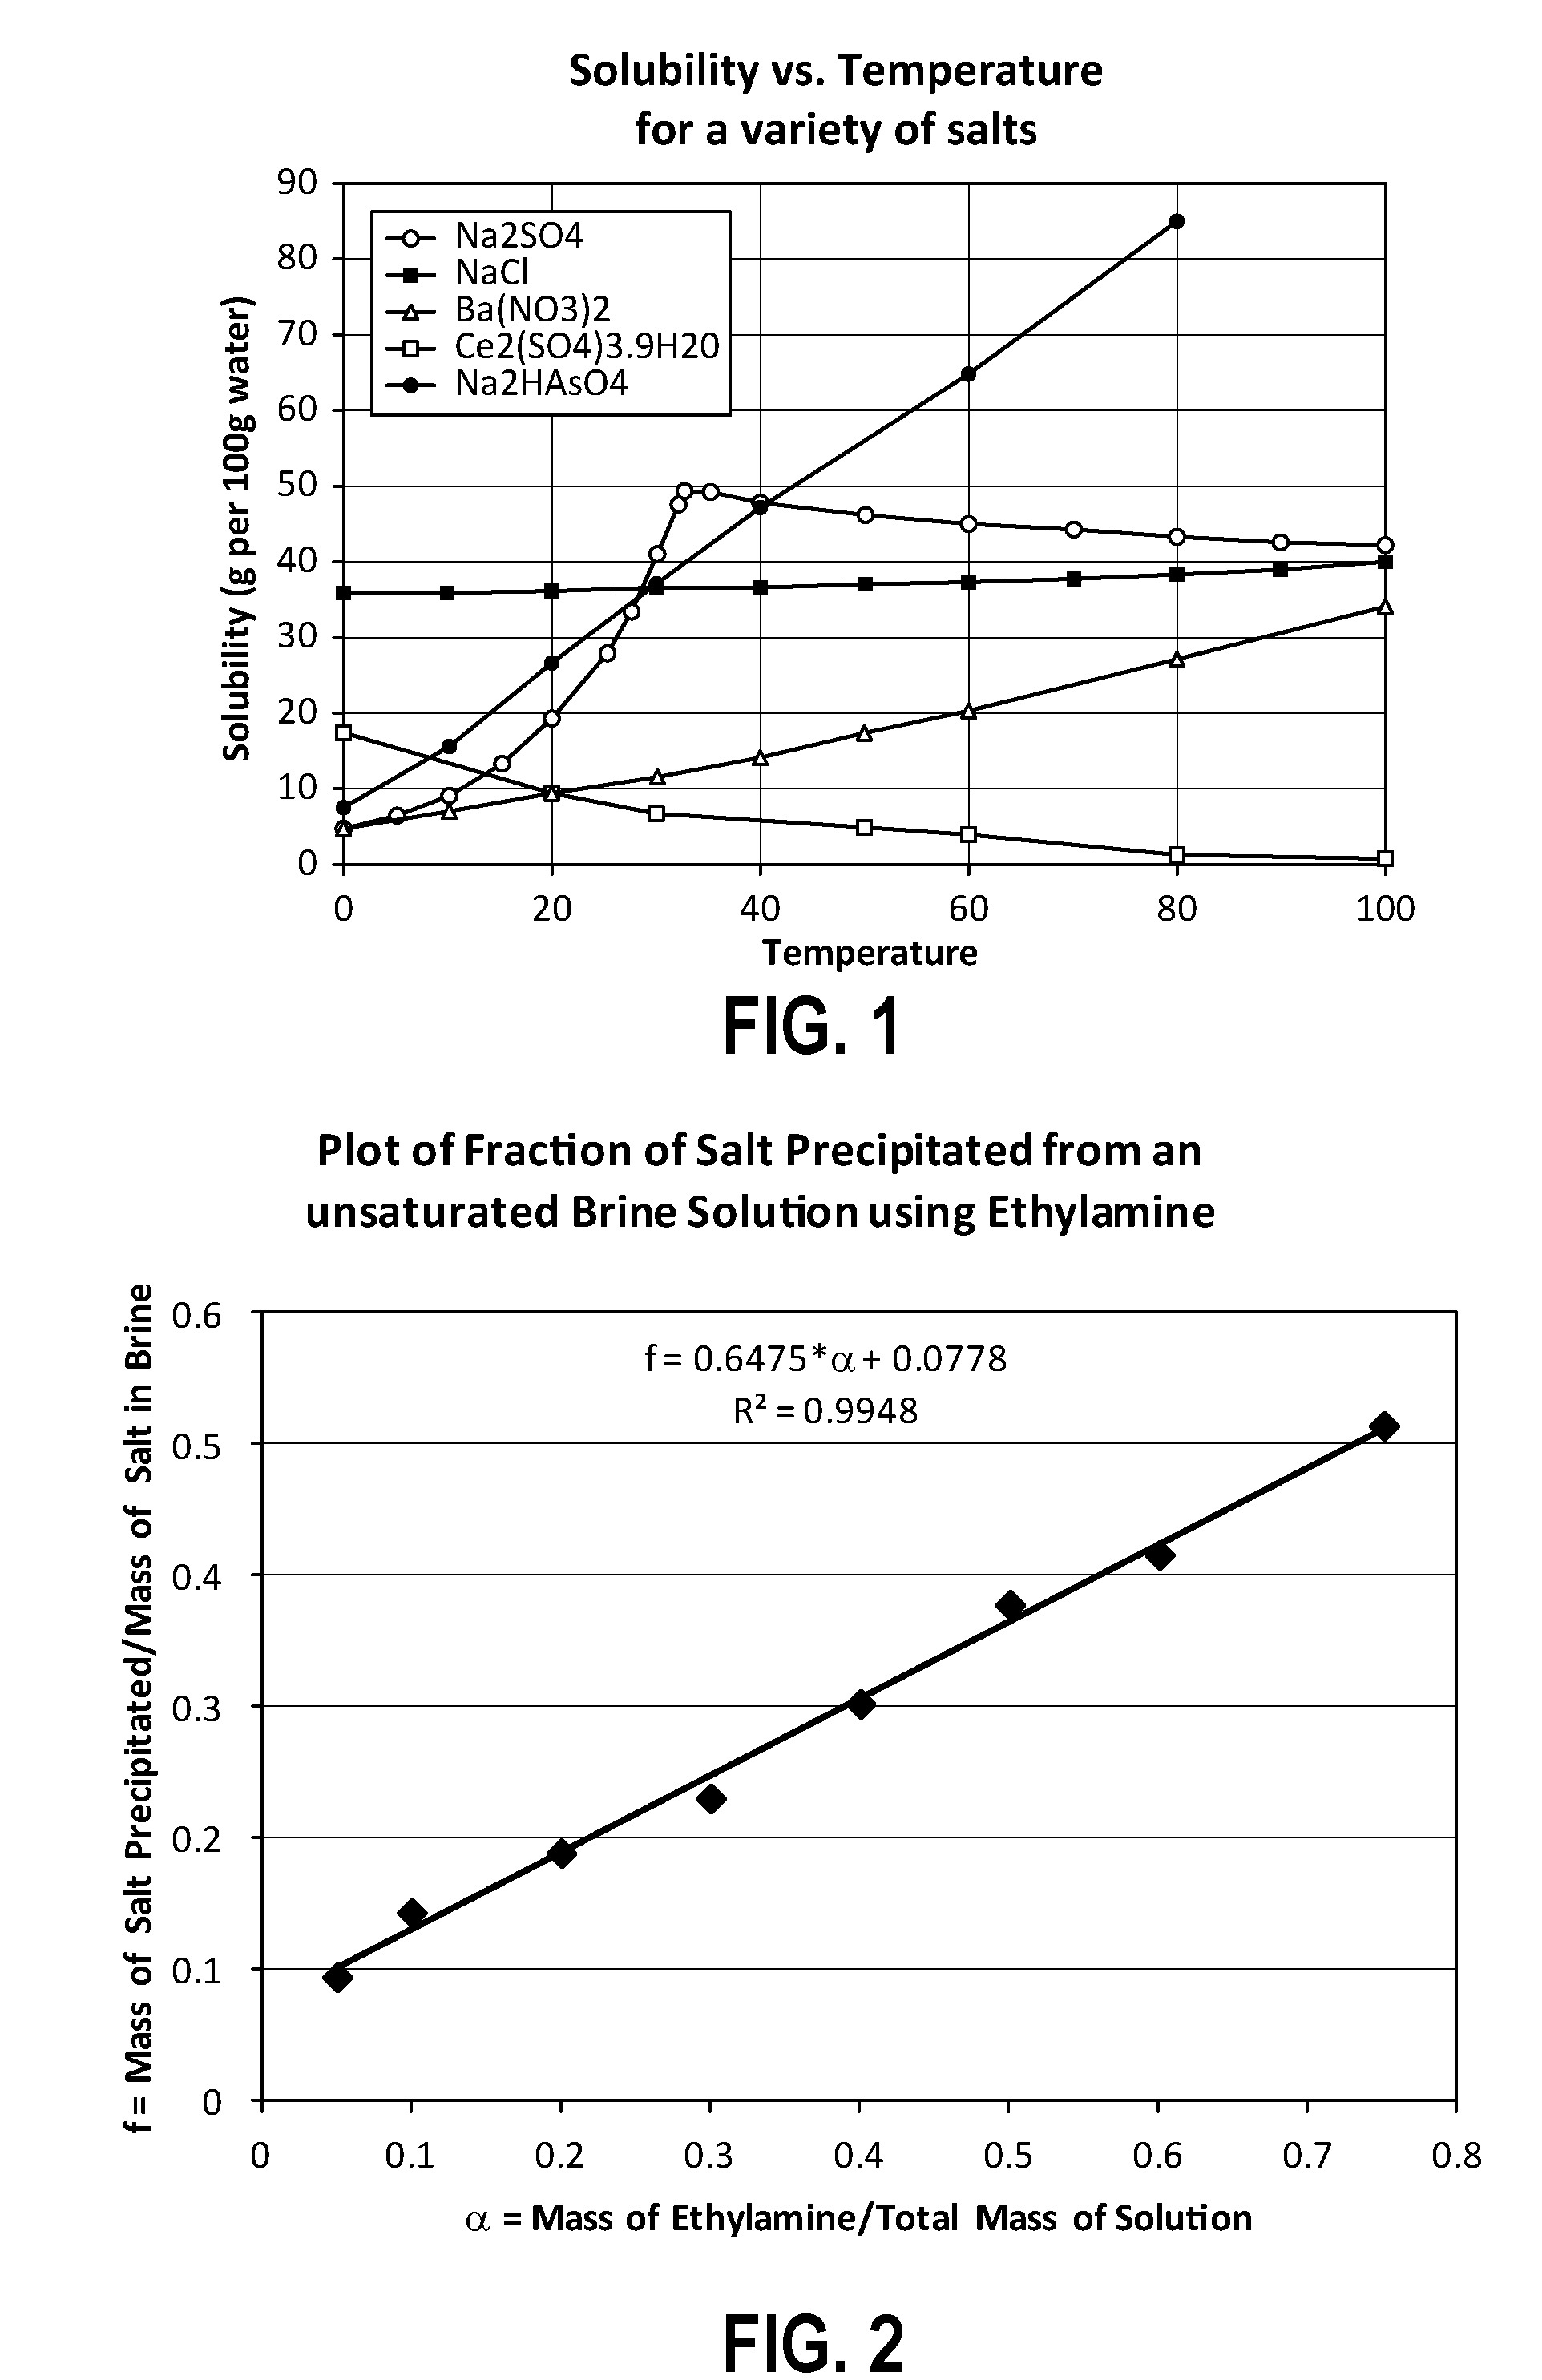 Systems, apparatus, and methods for separating salts from water